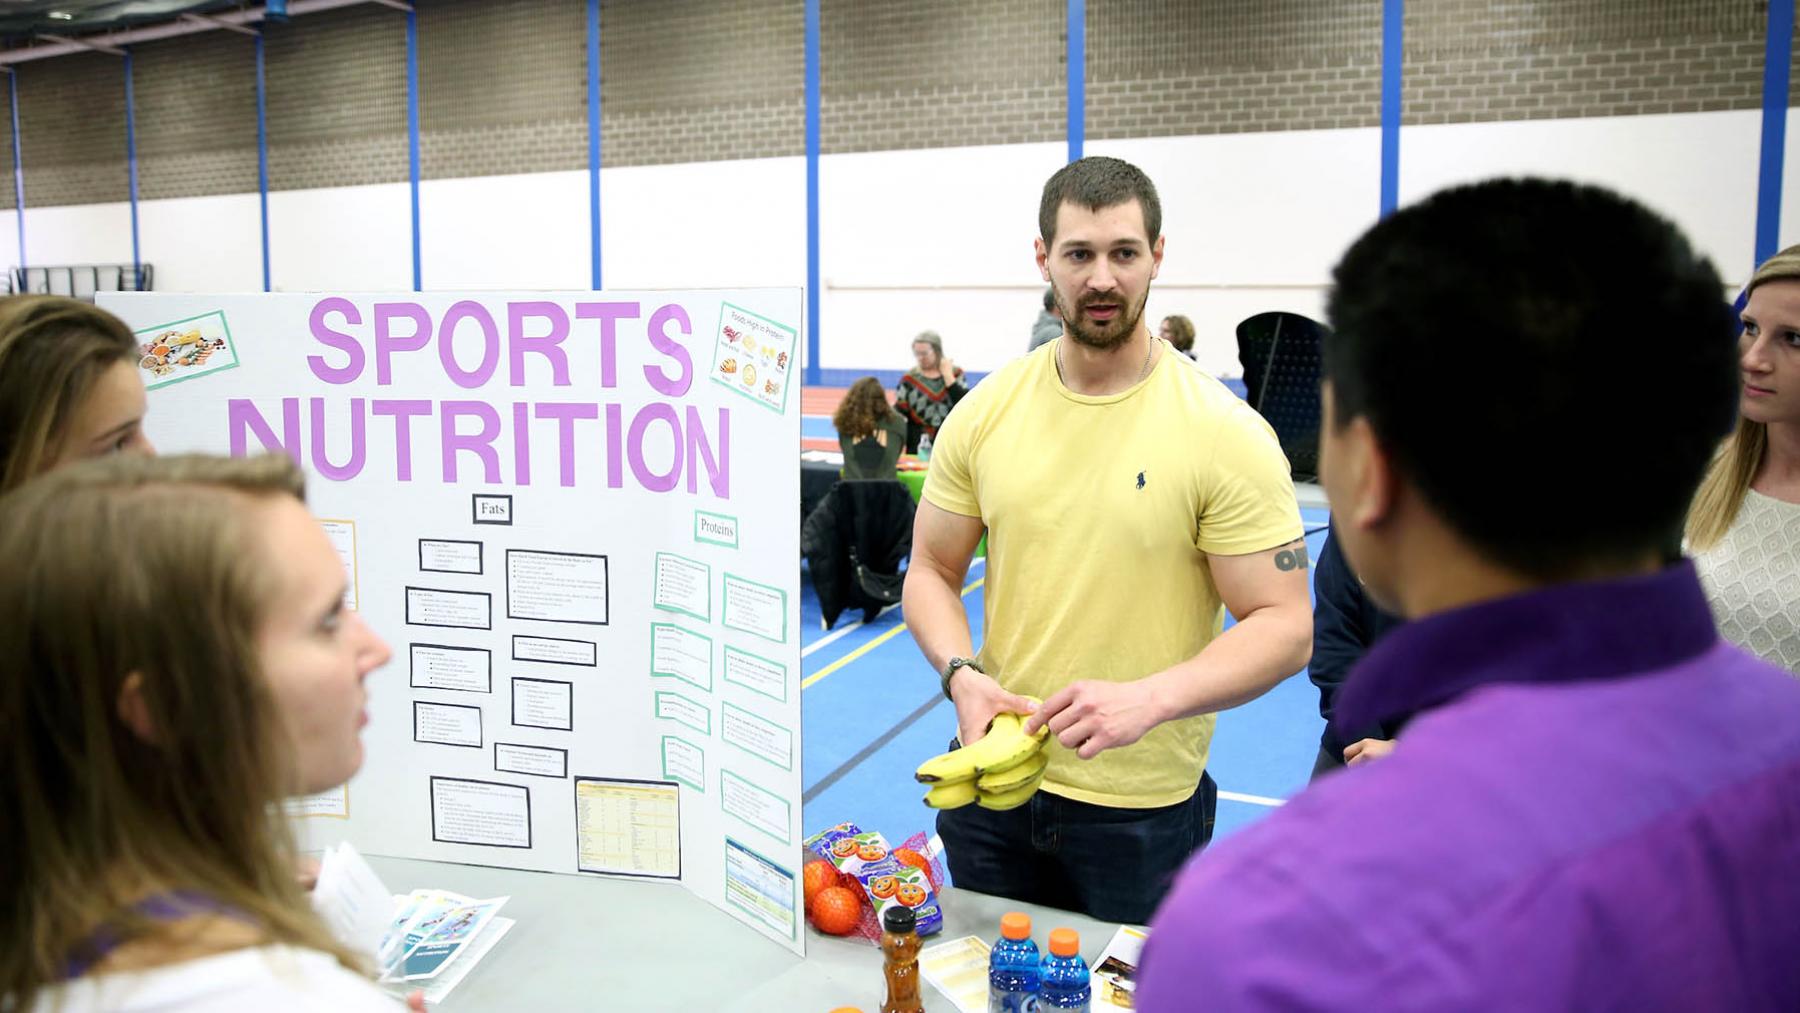 Student presenting sports nutrition